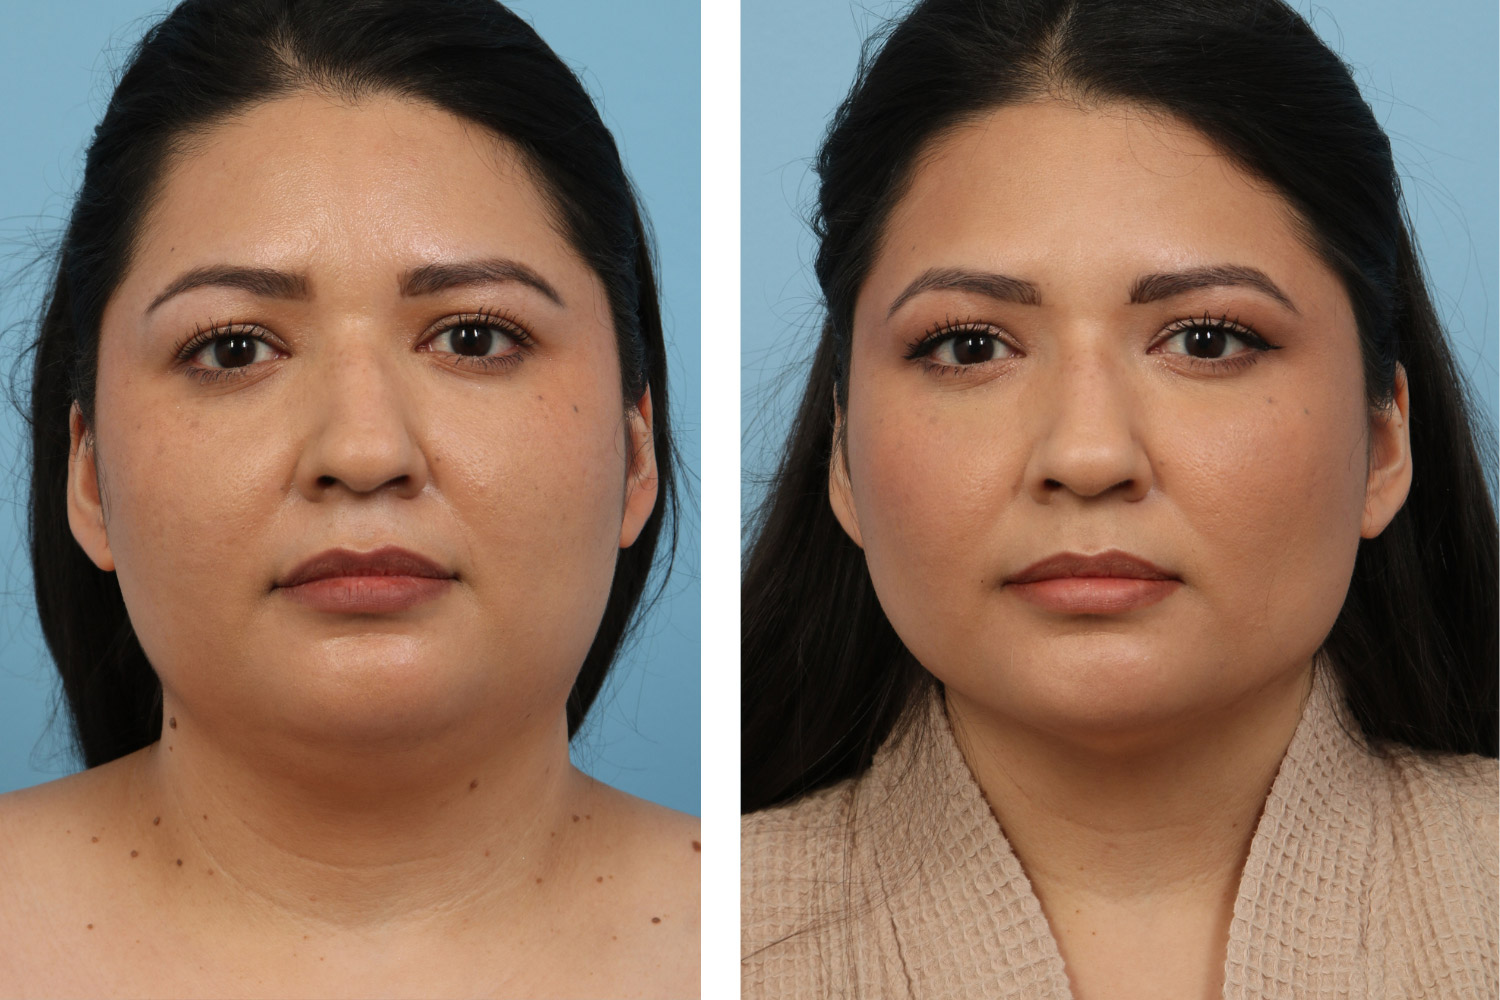 Neck liposuction procedure on a 30-year-old woman